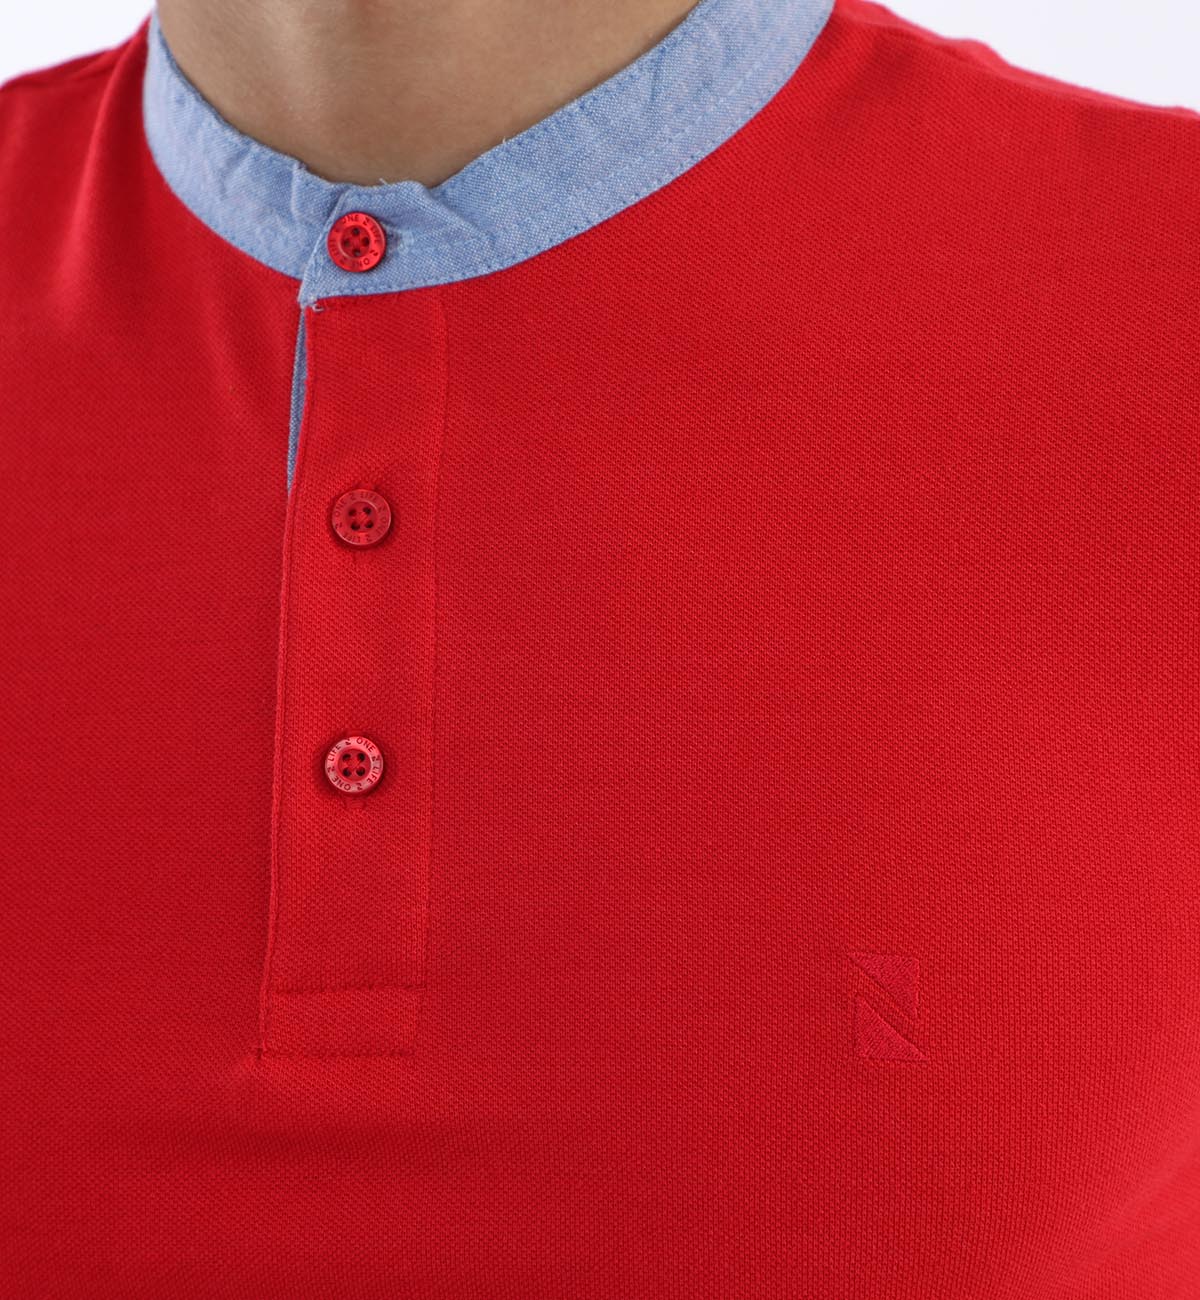 Ban Polo Red shirt for mens